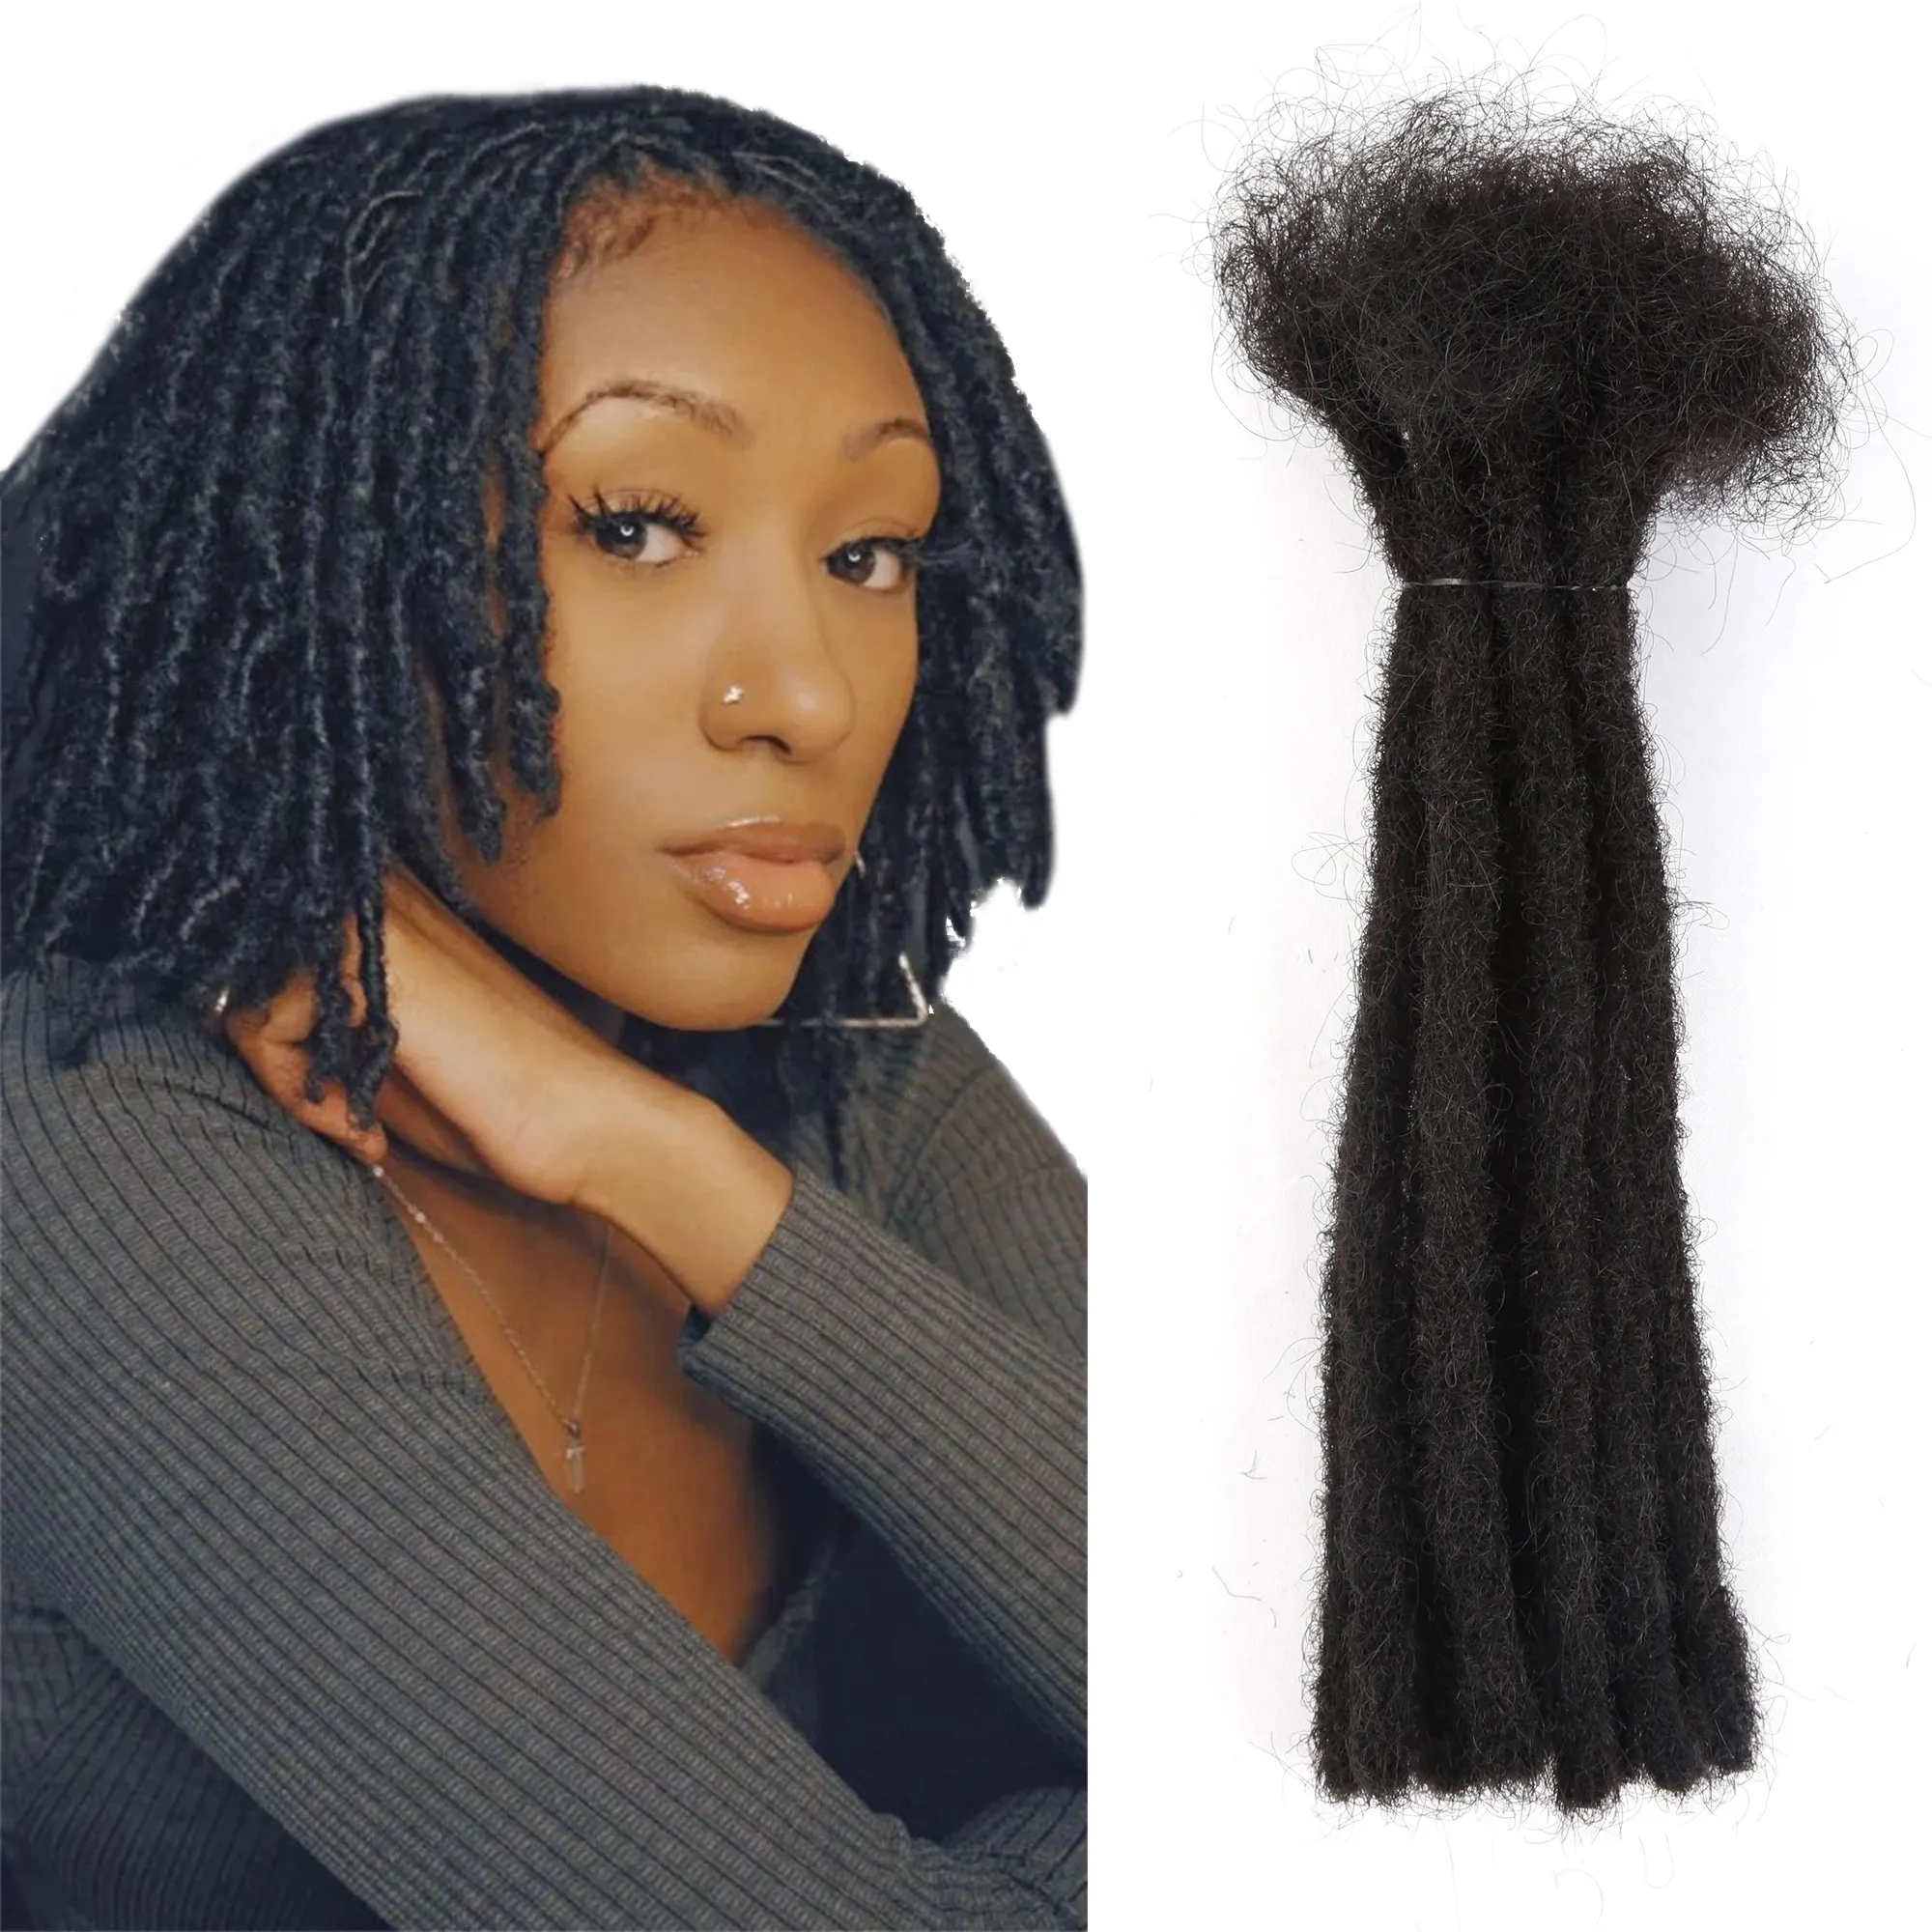 100% Human Hair Men Women Thickness 10 Strands Full Handmade Afro Dyed Bleached Permanent Natural Black Dreadlock Extensions